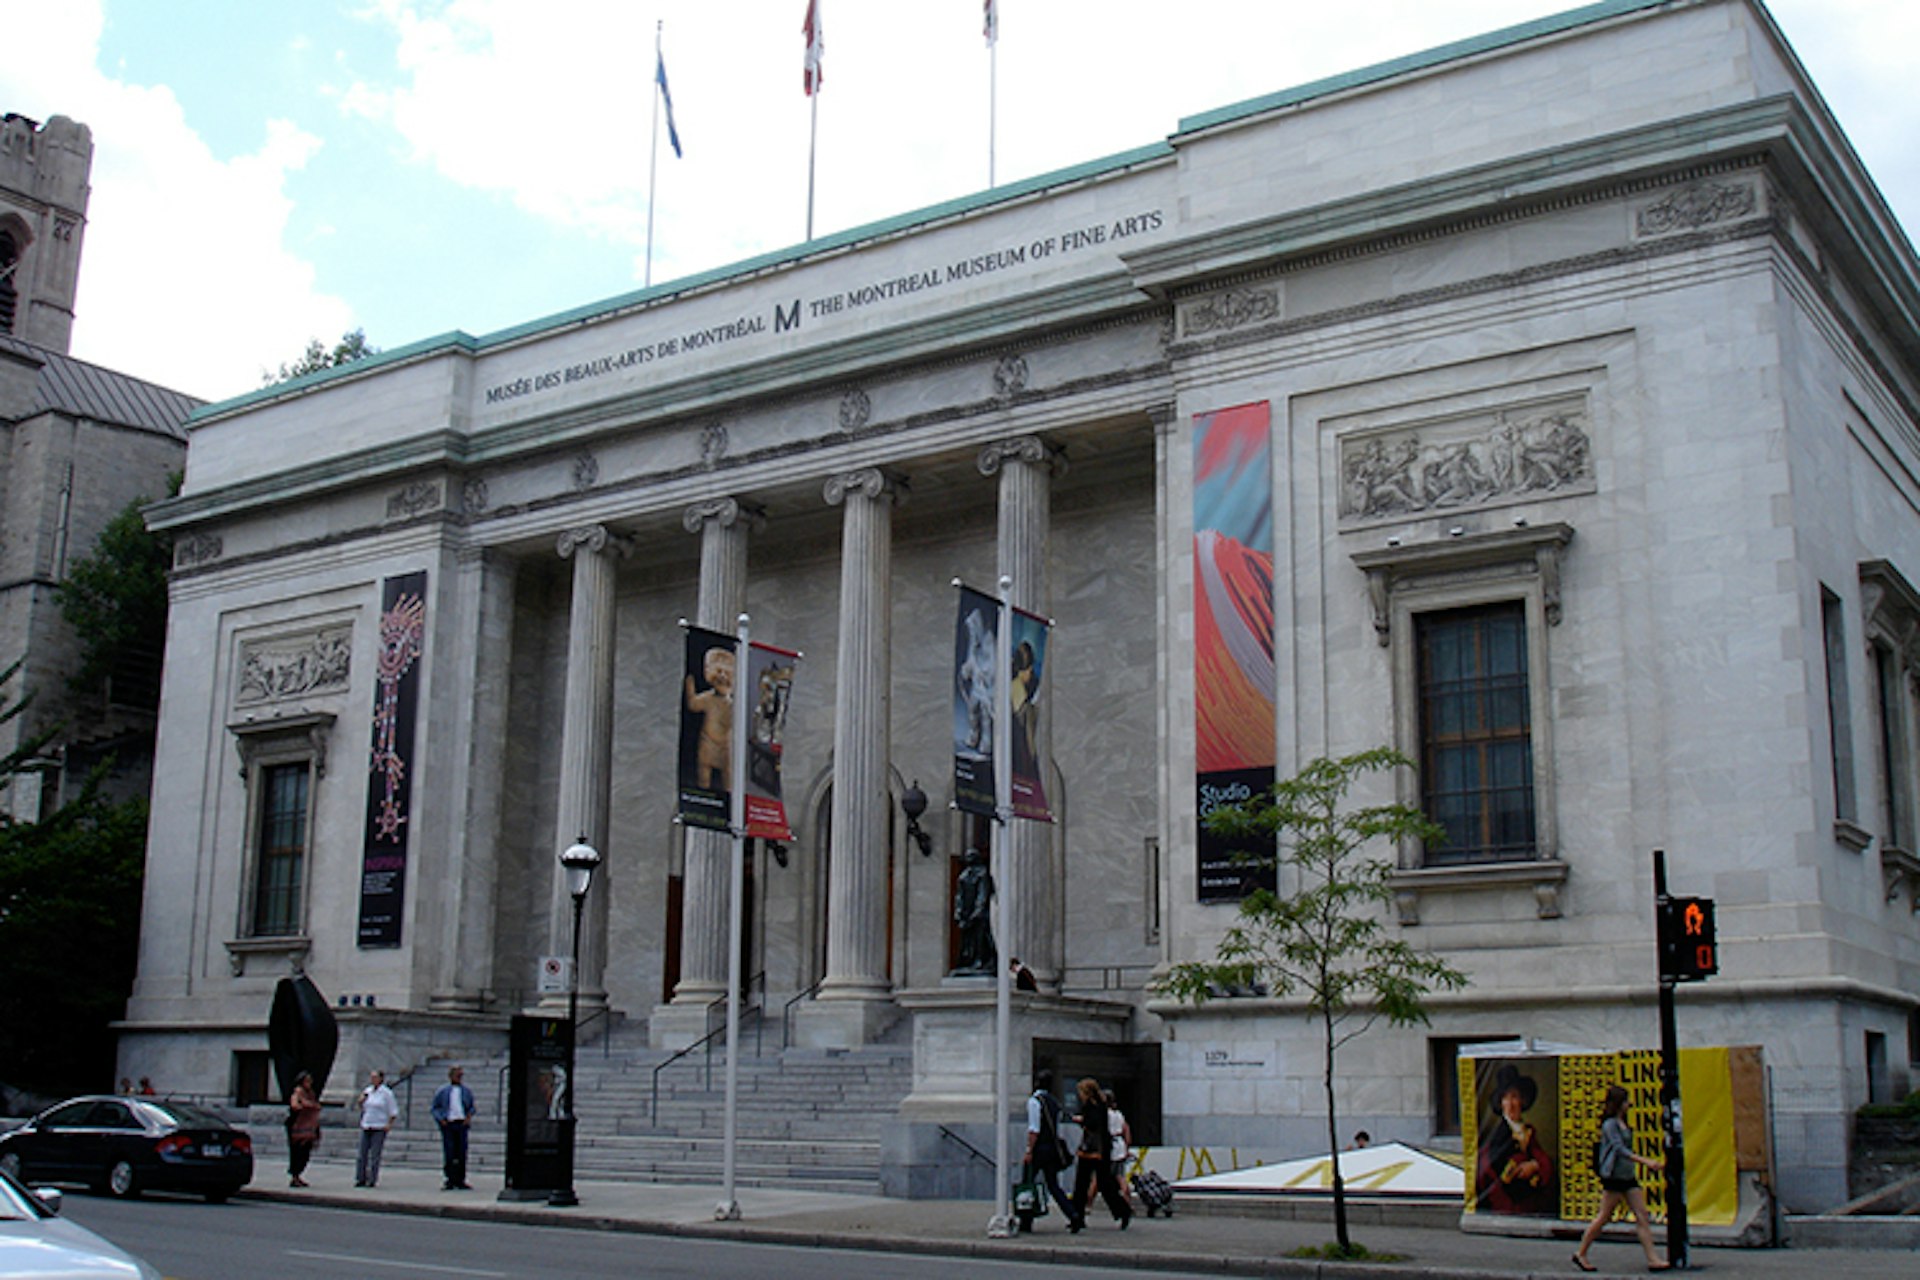 The Musée des Beaux-Arts was first established in 1860, making it the oldest such establishment in Canada. Image by daryl_mitchell / (CC BY-SA 2.0